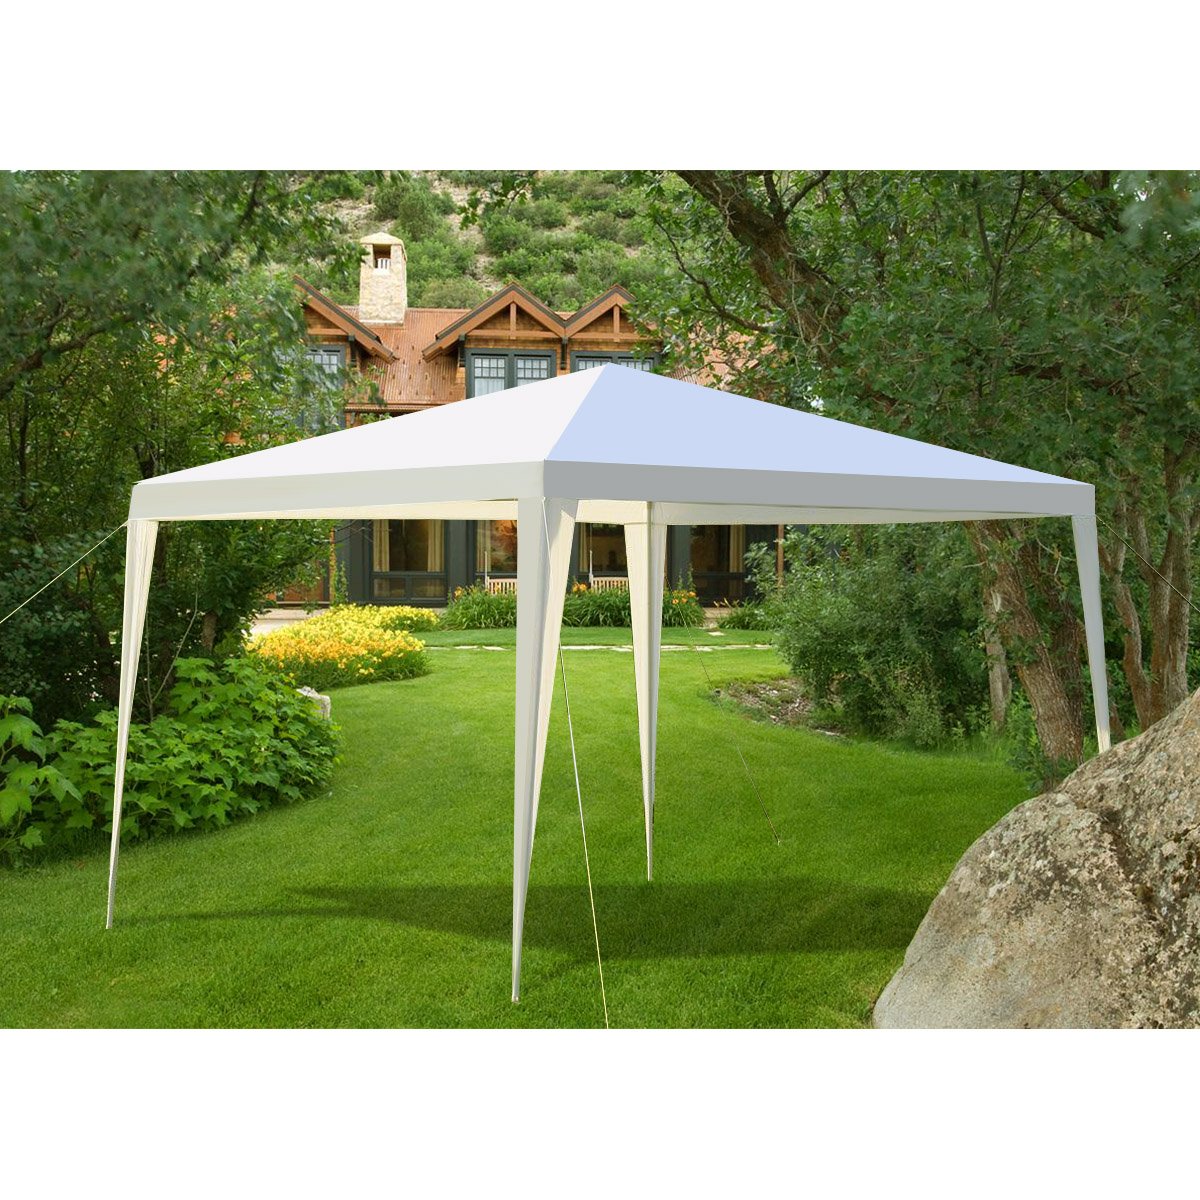 Outdoor Heavy Duty 10'x10' Canopy Party Wedding Tent Gazebo Pavilion Cater Event